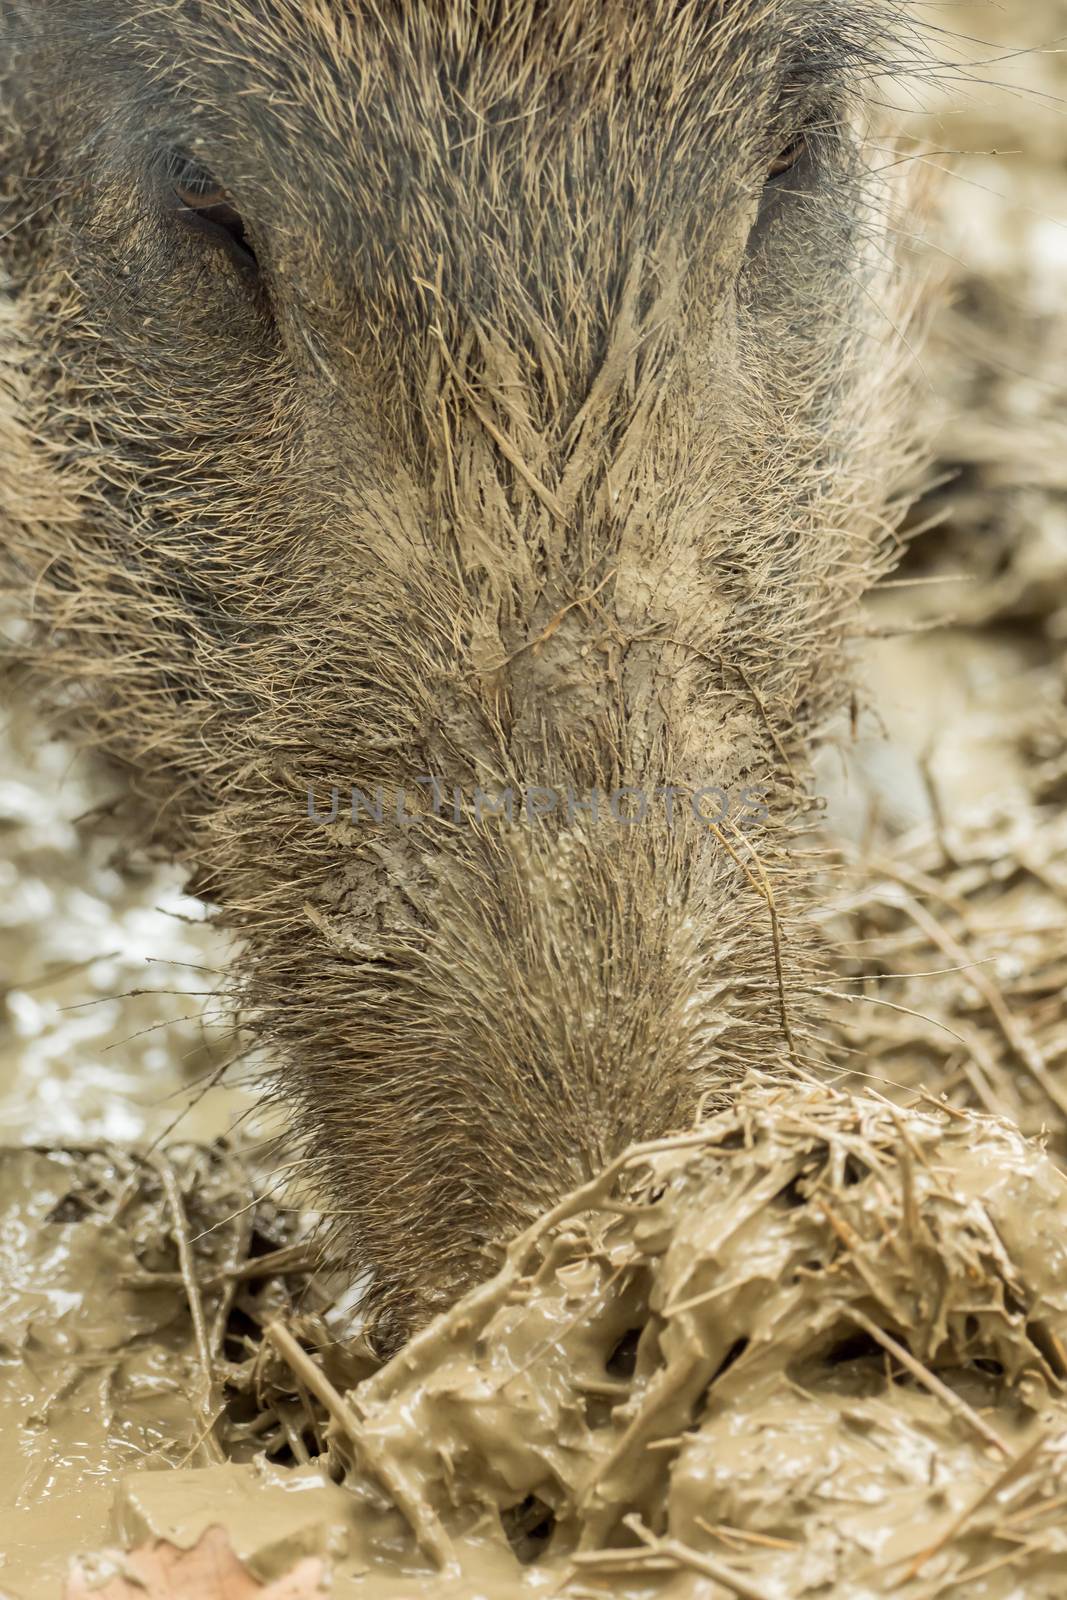 A boar is looking for food in the wet mud by sandra_fotodesign